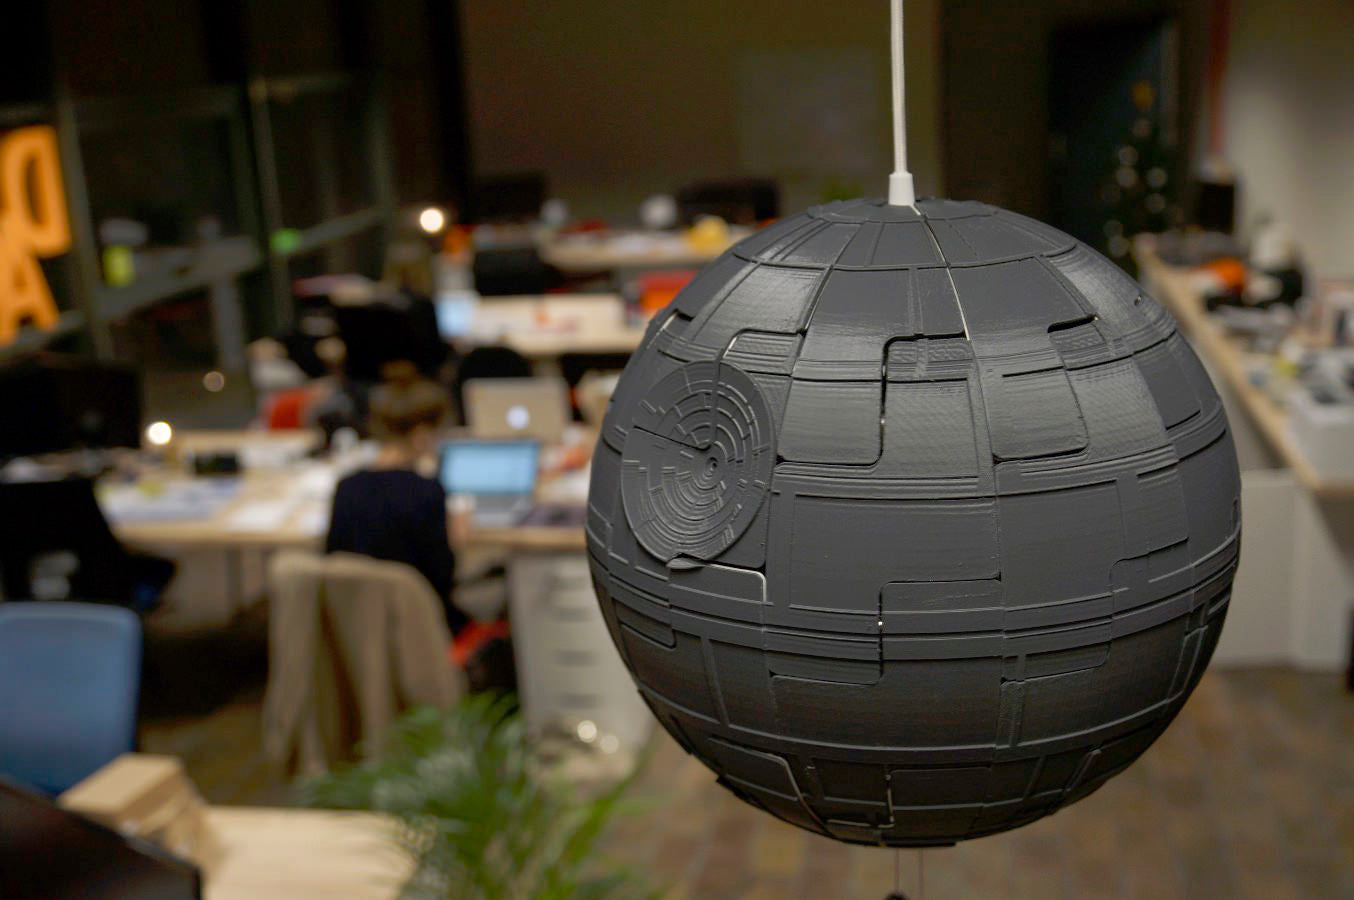 Death Star for Ikea lamp